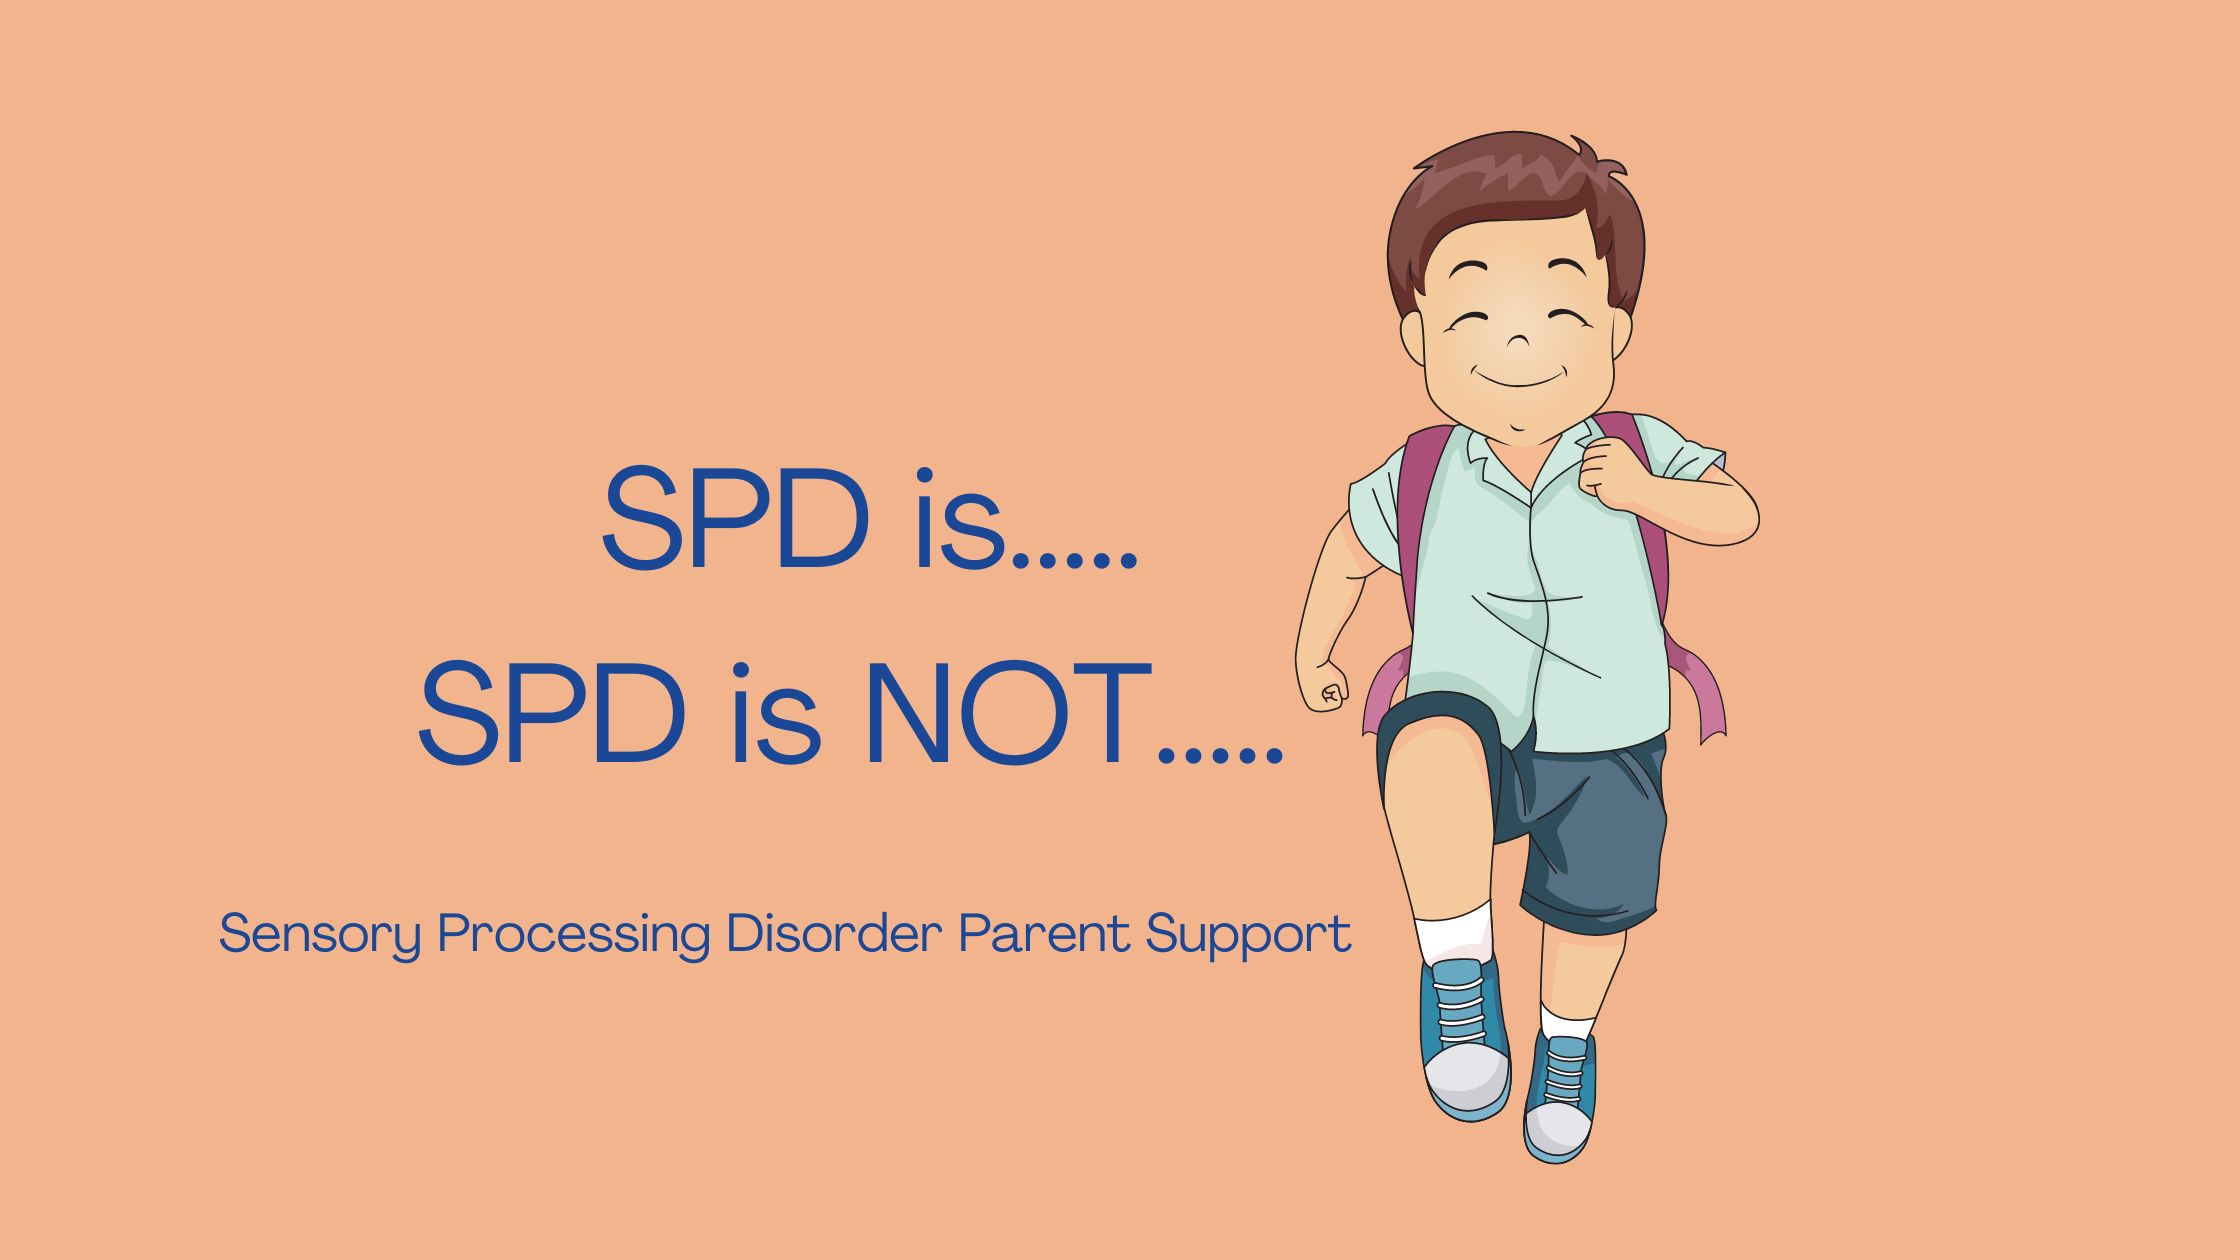 Child with sensory processing disorder SPD is..... SPD is NOT